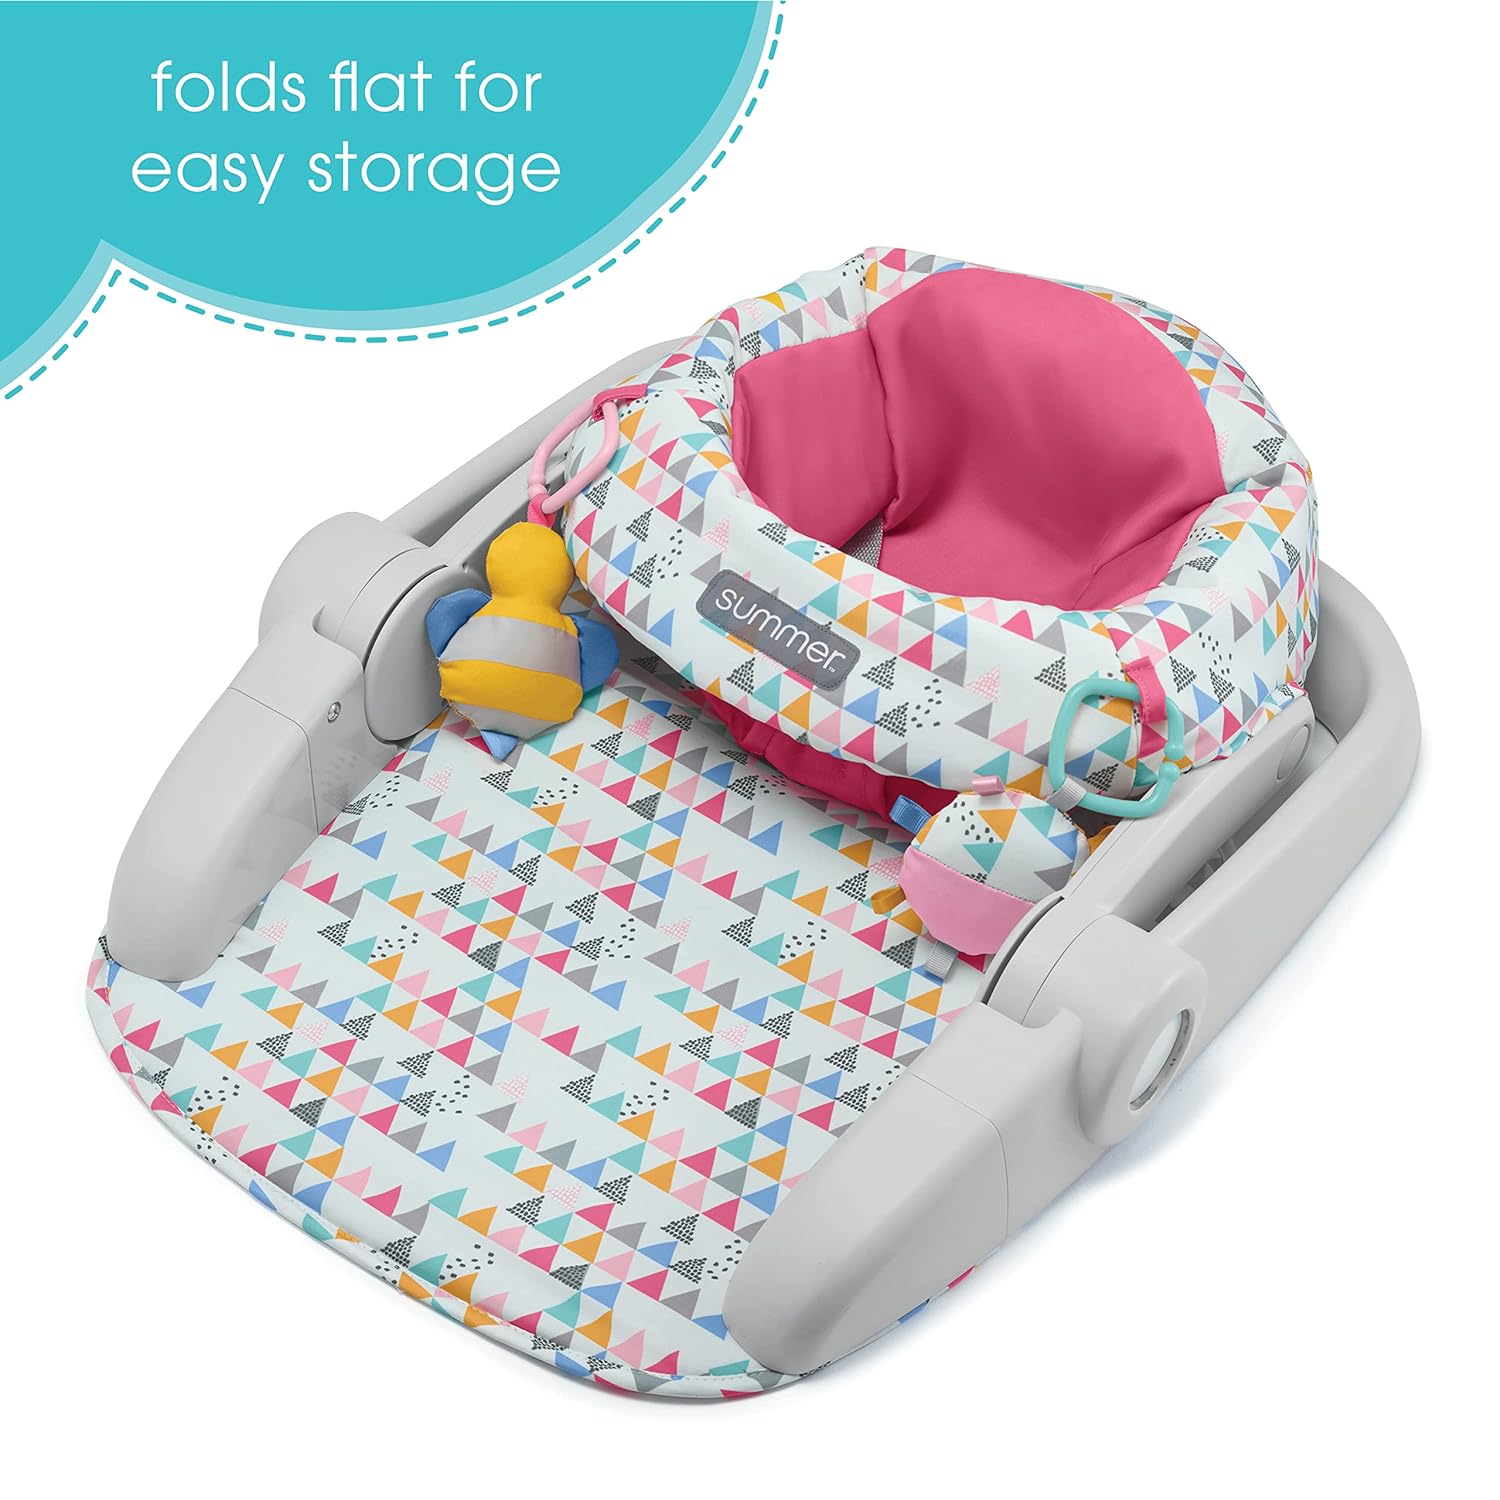 Summer Infant Learn-to-Sit 2-Position Floor Seat (Funfetti Pink) Sit Baby Up in This Adjustable Baby Activity Seat Appropriate for Ages Months Includes Toys - image 4 of 6